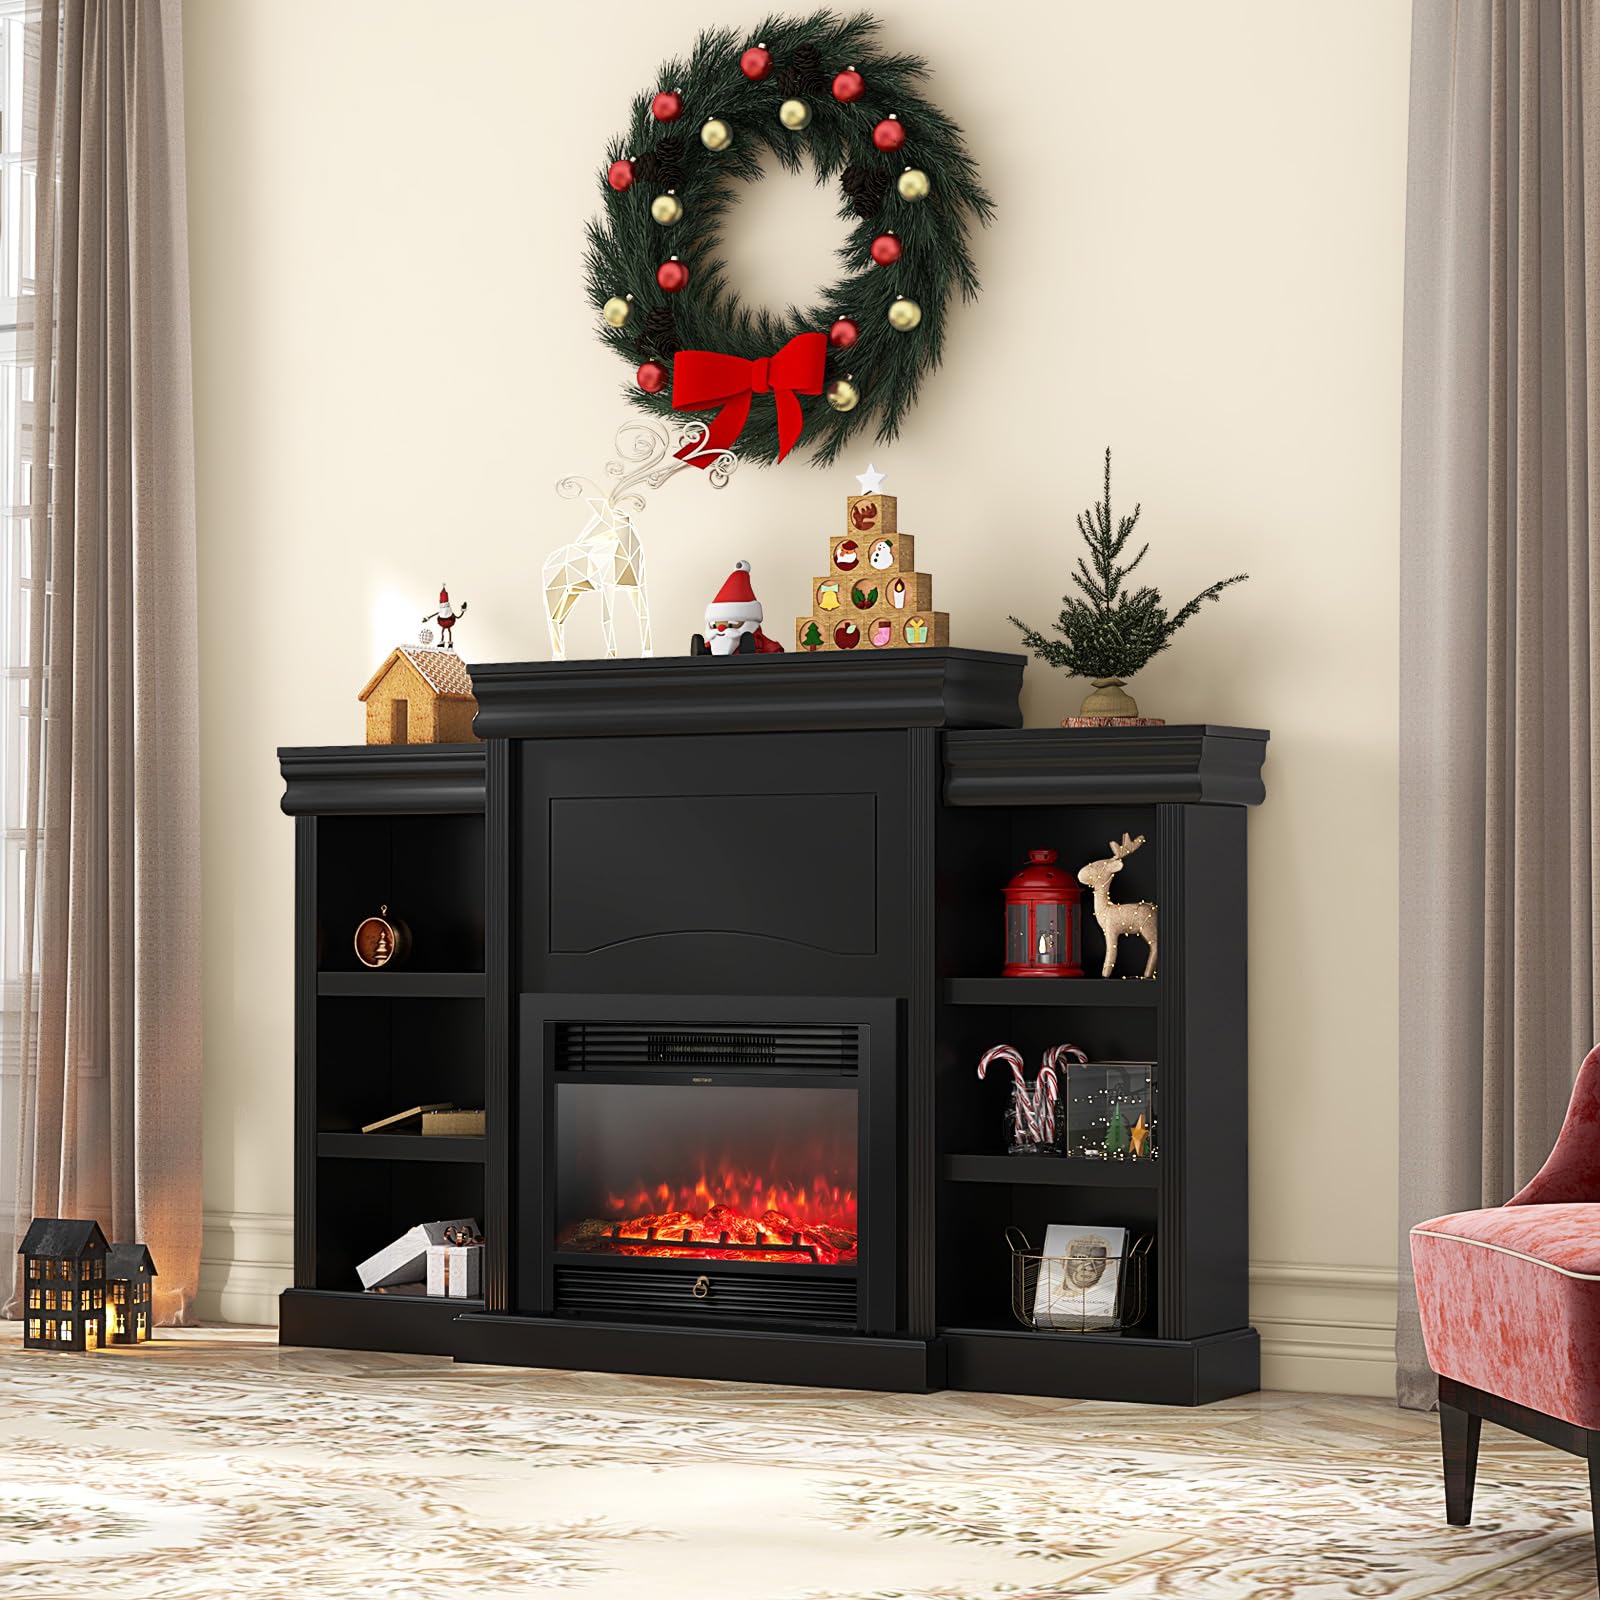 Giantex Electric Fireplace TV Stand - 1500W Electric Fireplace Inserts with 3 Flame Colors